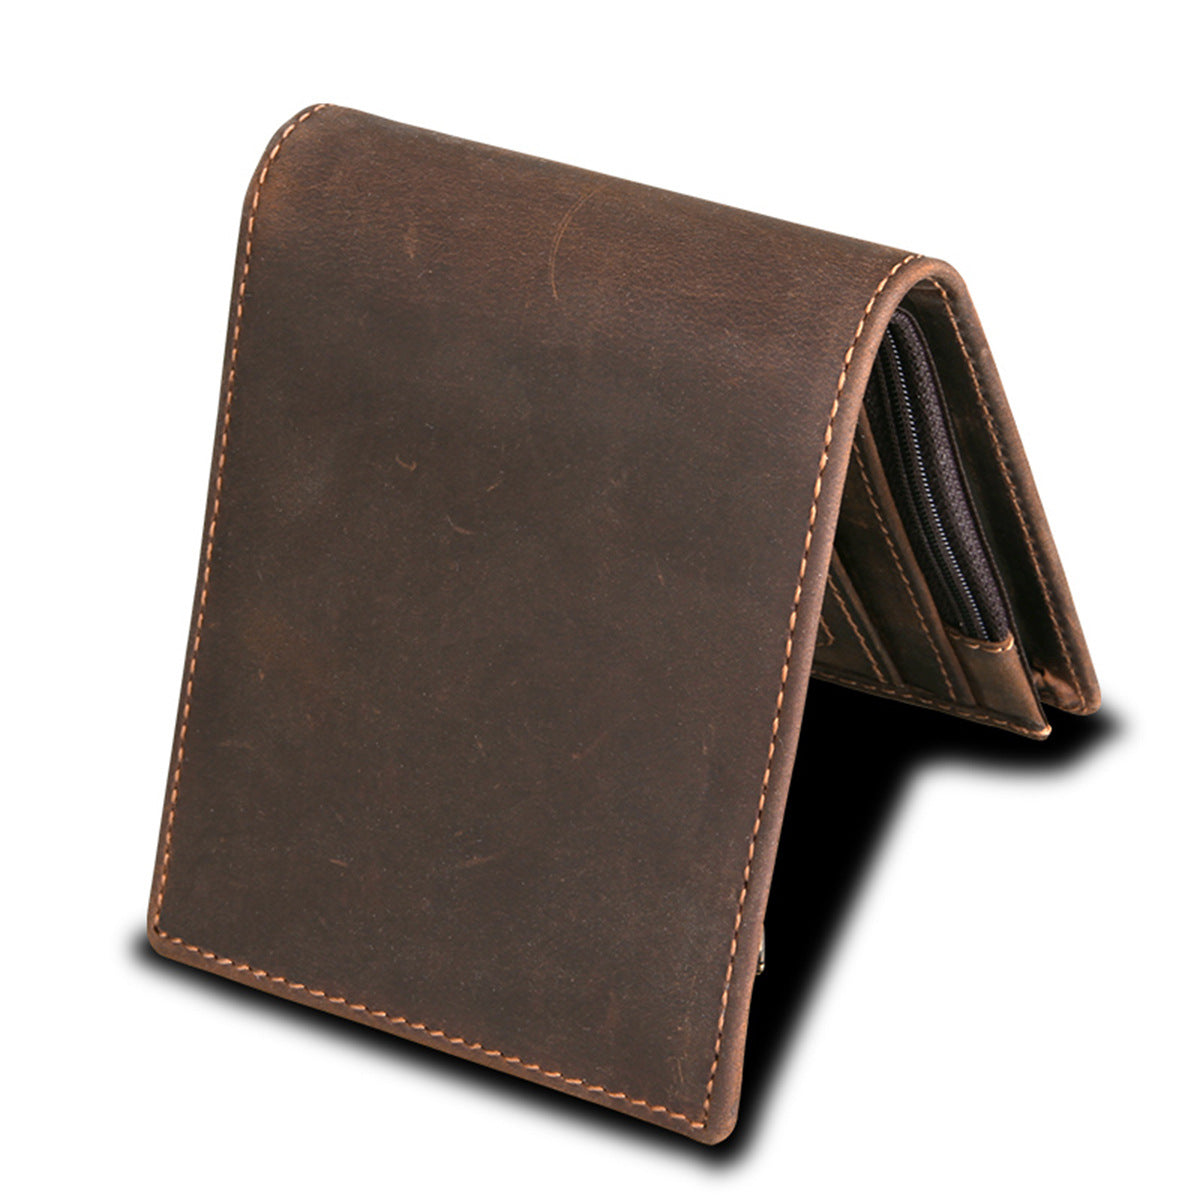 Close-up of Men's Crazy Horse Leather Wallet